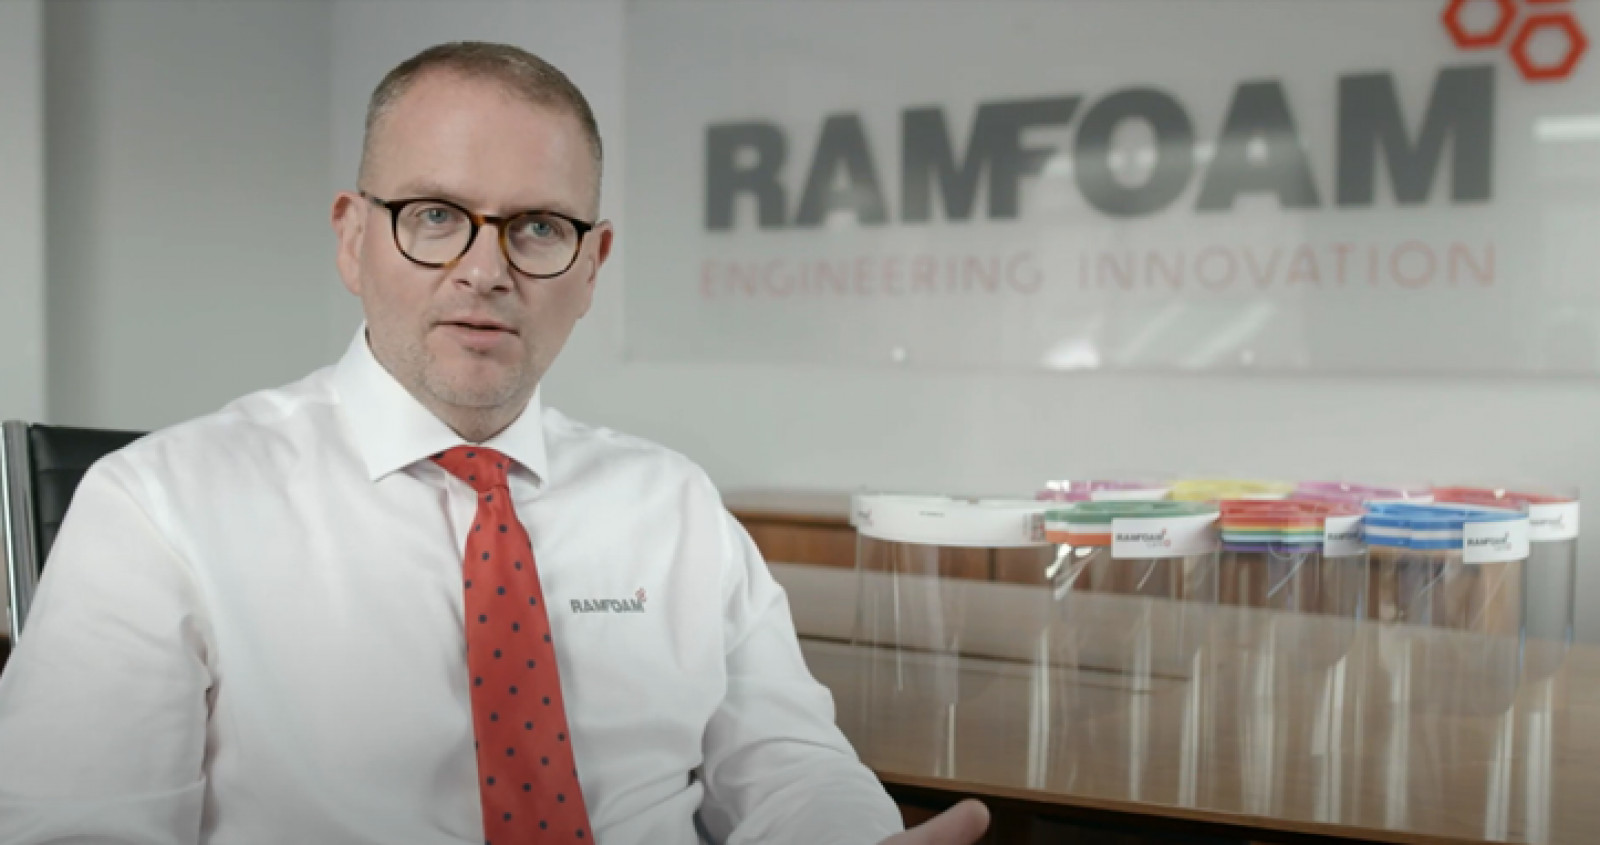 Ramfoam creates over 500 jobs in 2020 and plans to...